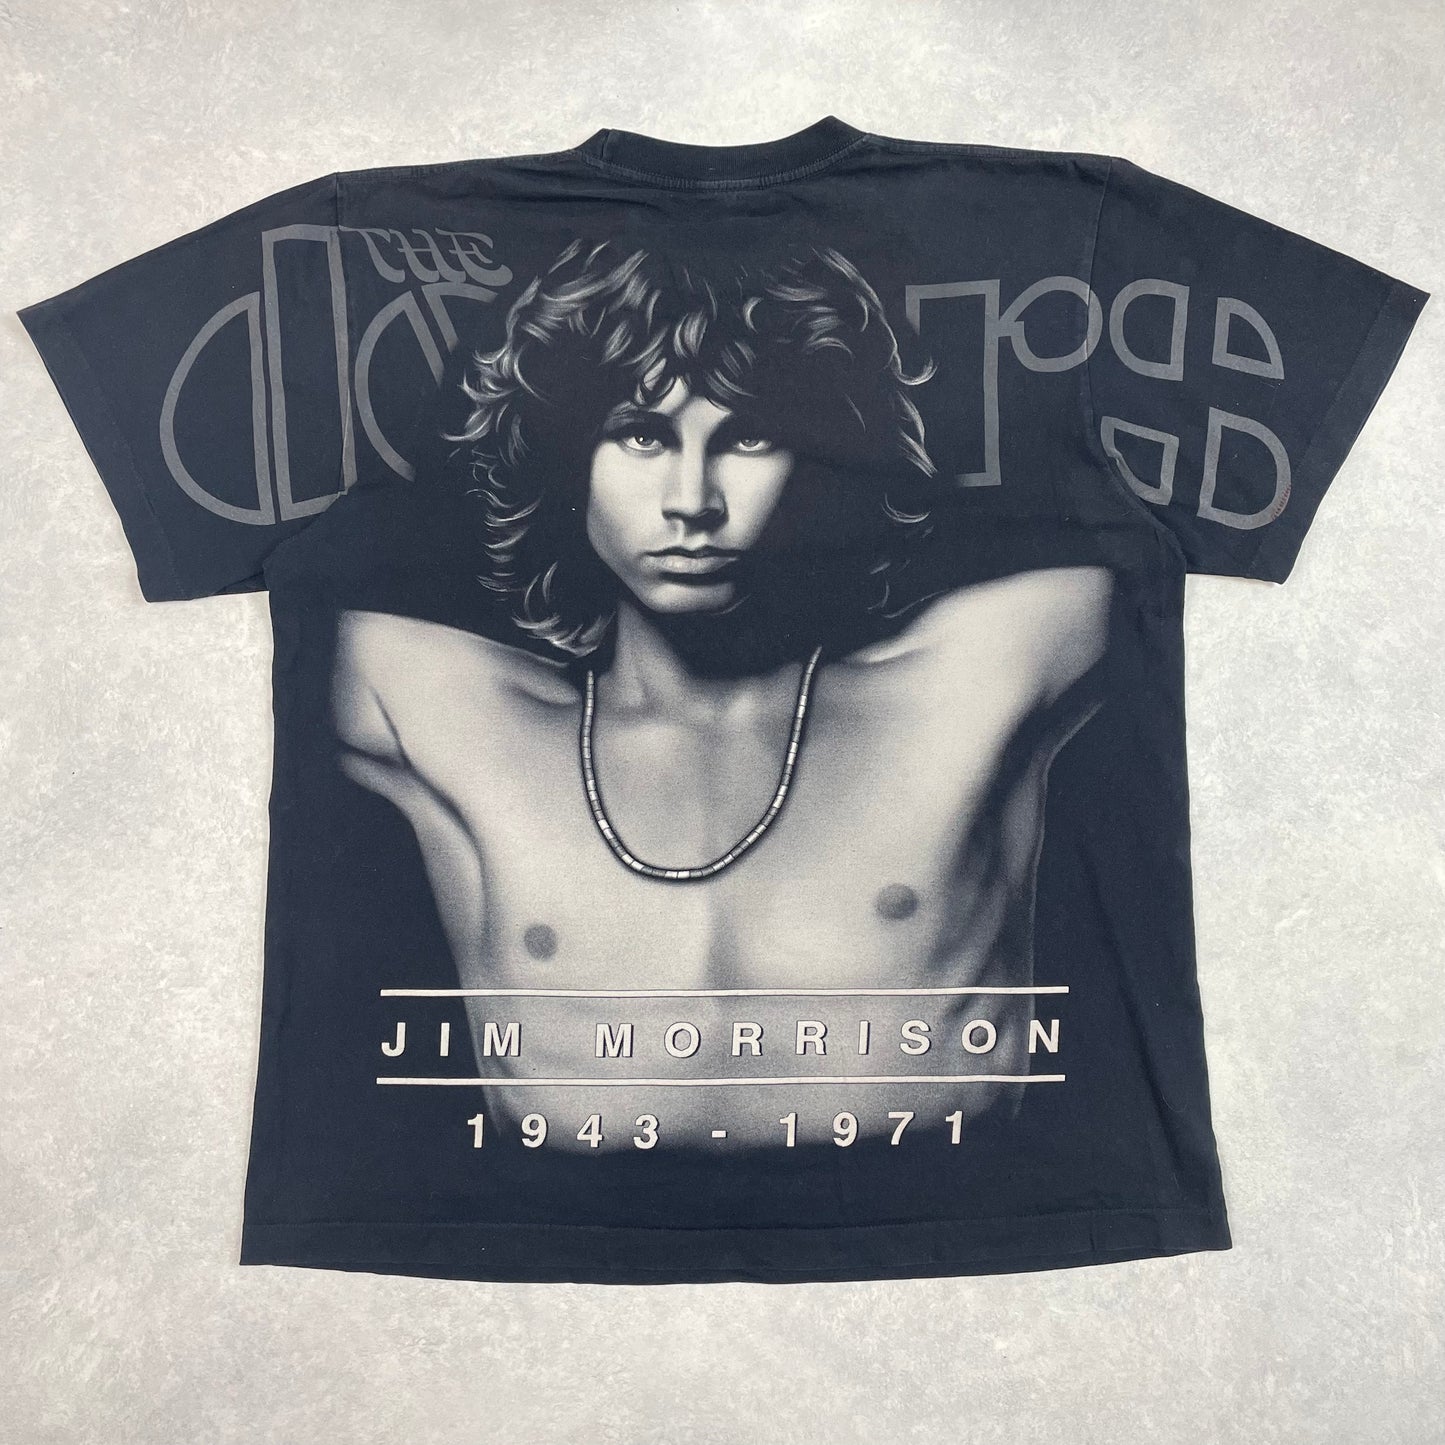 Vintage Single Stitch T-Shirt The Doors Jim Morrison 1943 -1971 All Over Printed